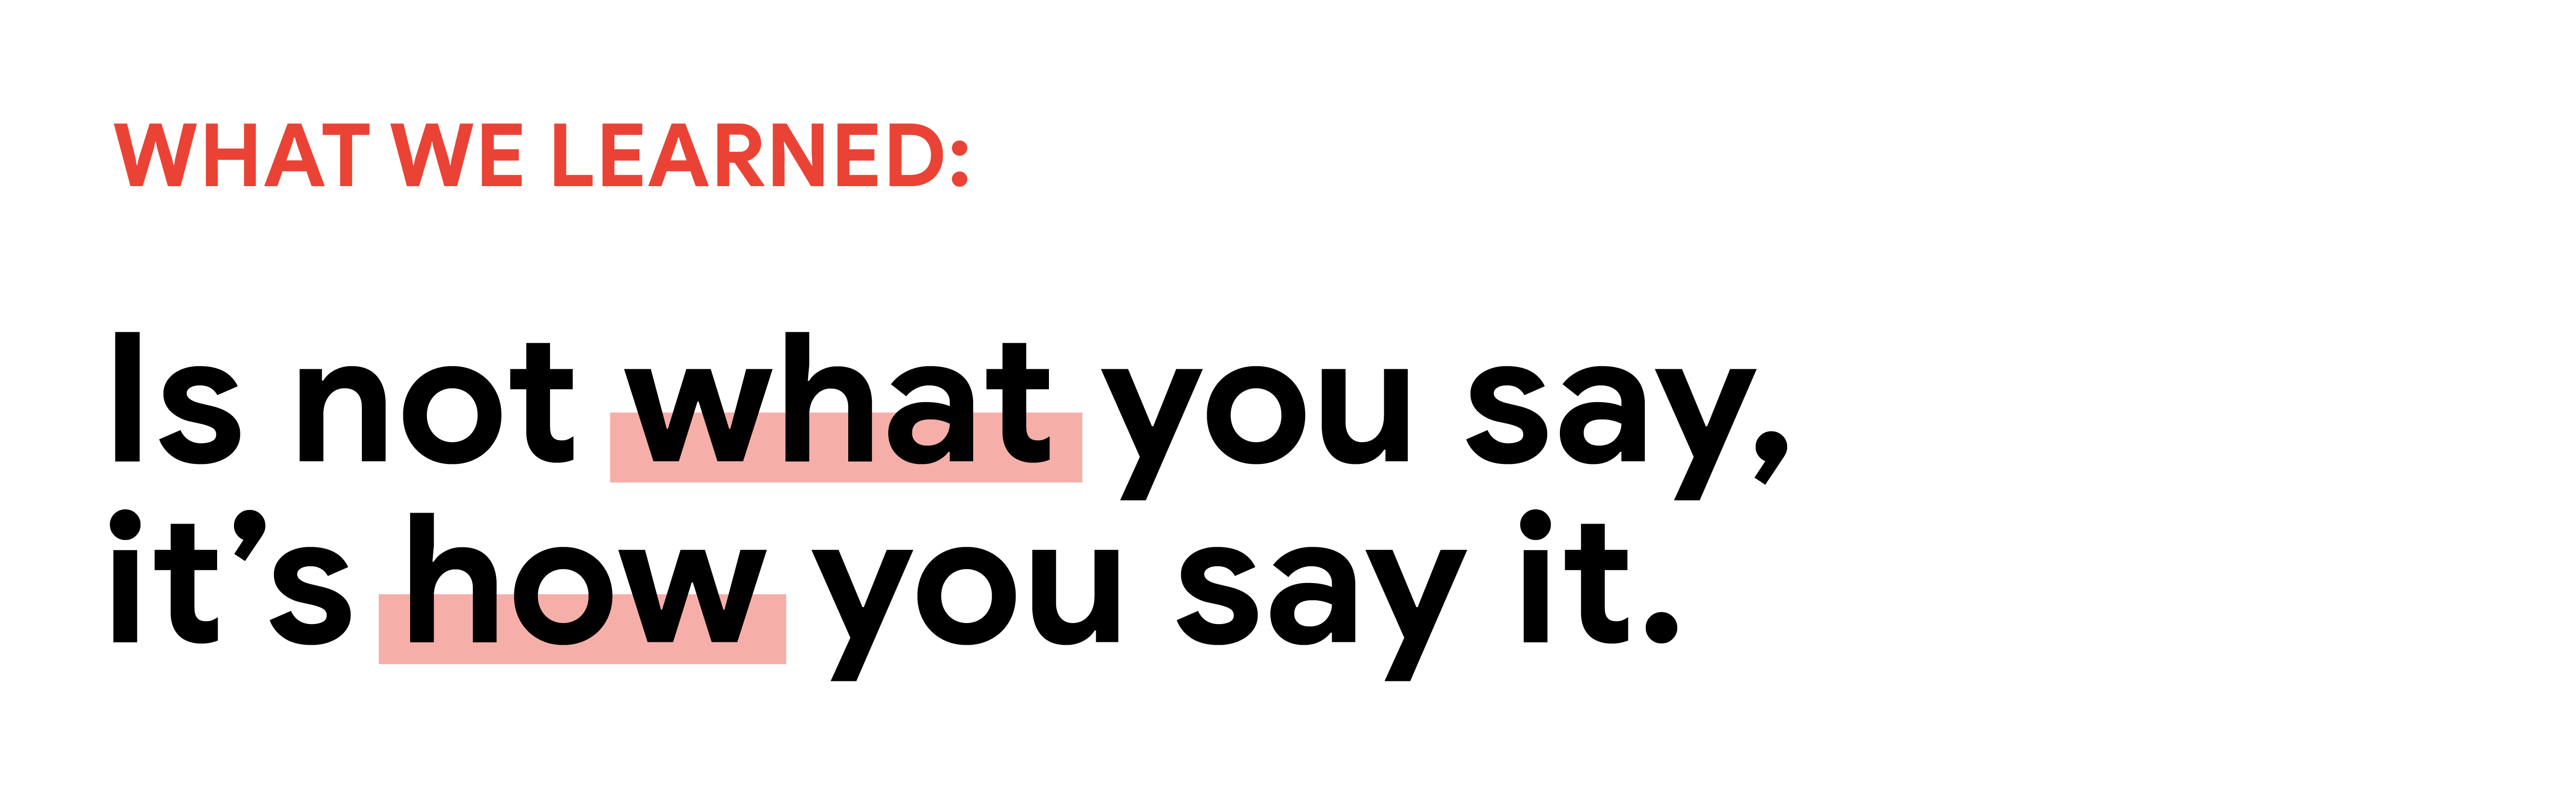 What we learned: Is not what you say, it’s how you say it.